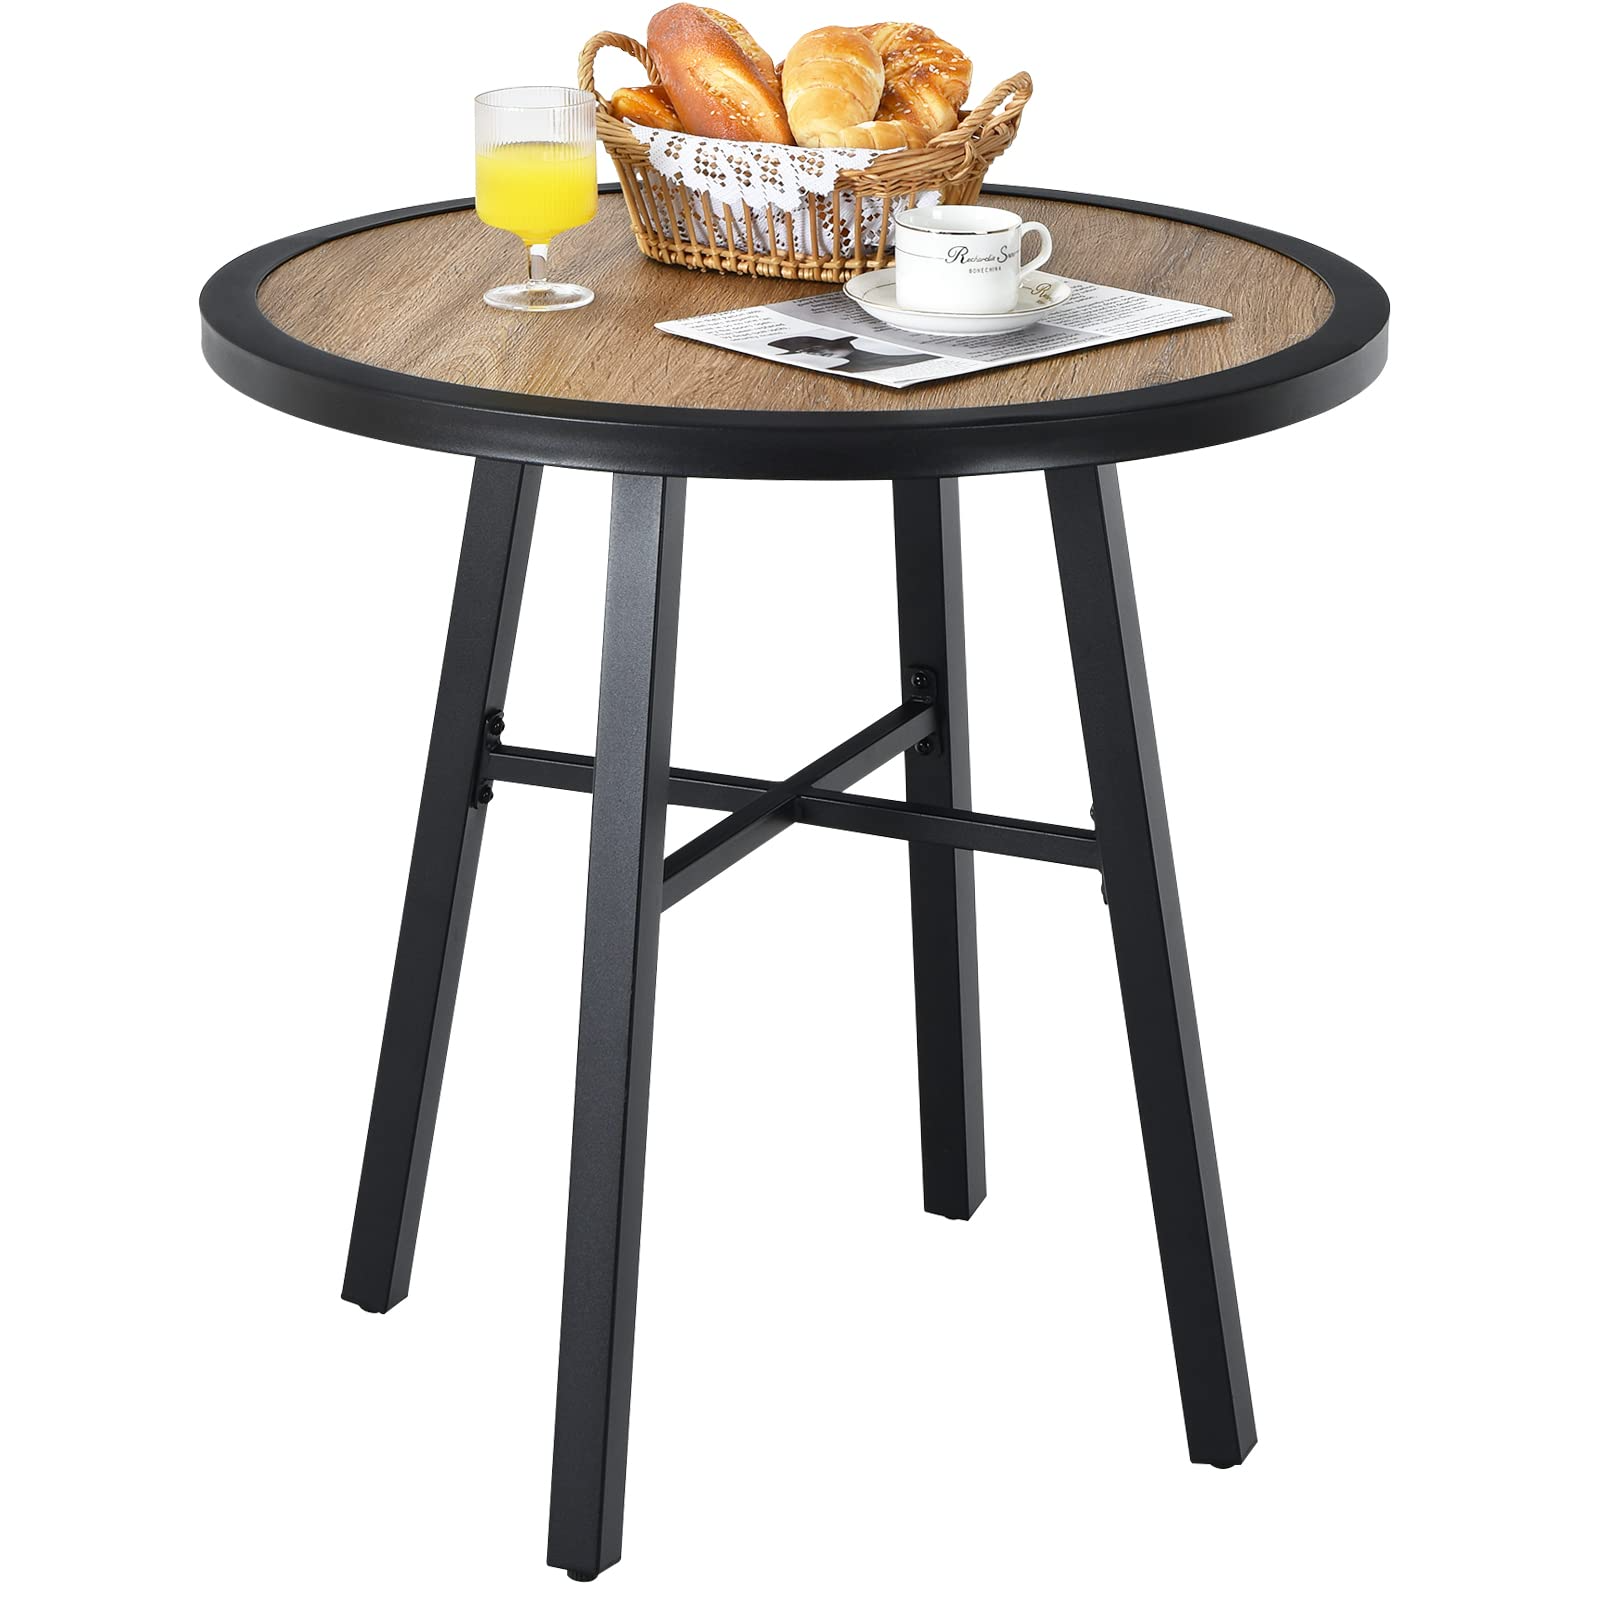 29 Inch Patio Bistro Table, Outdoor Round Bistro Table with Heavy-Duty Steel Frame